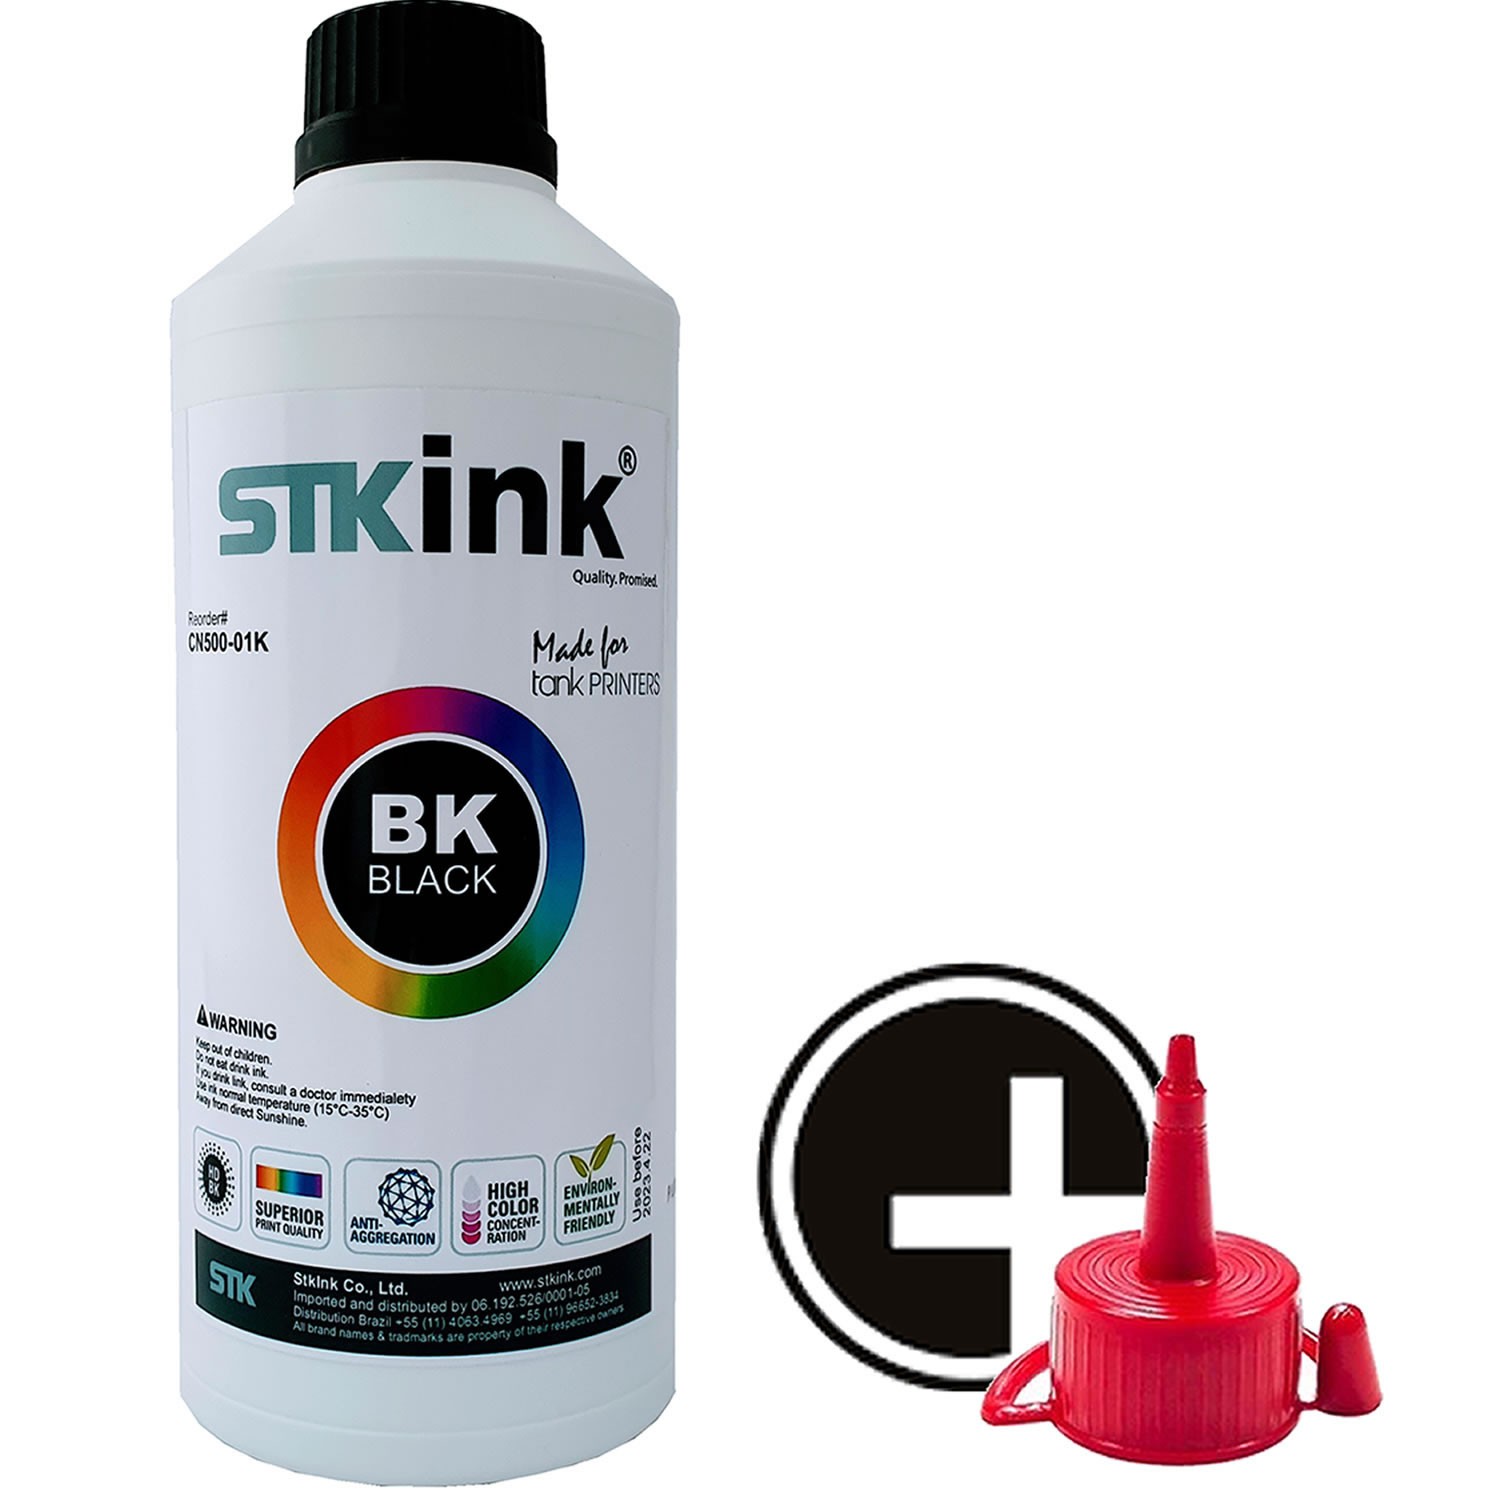 4 x 100ml Tinta STK BT5001 BT6001 T510W T710W T810W T910DW para InkTank Brother 